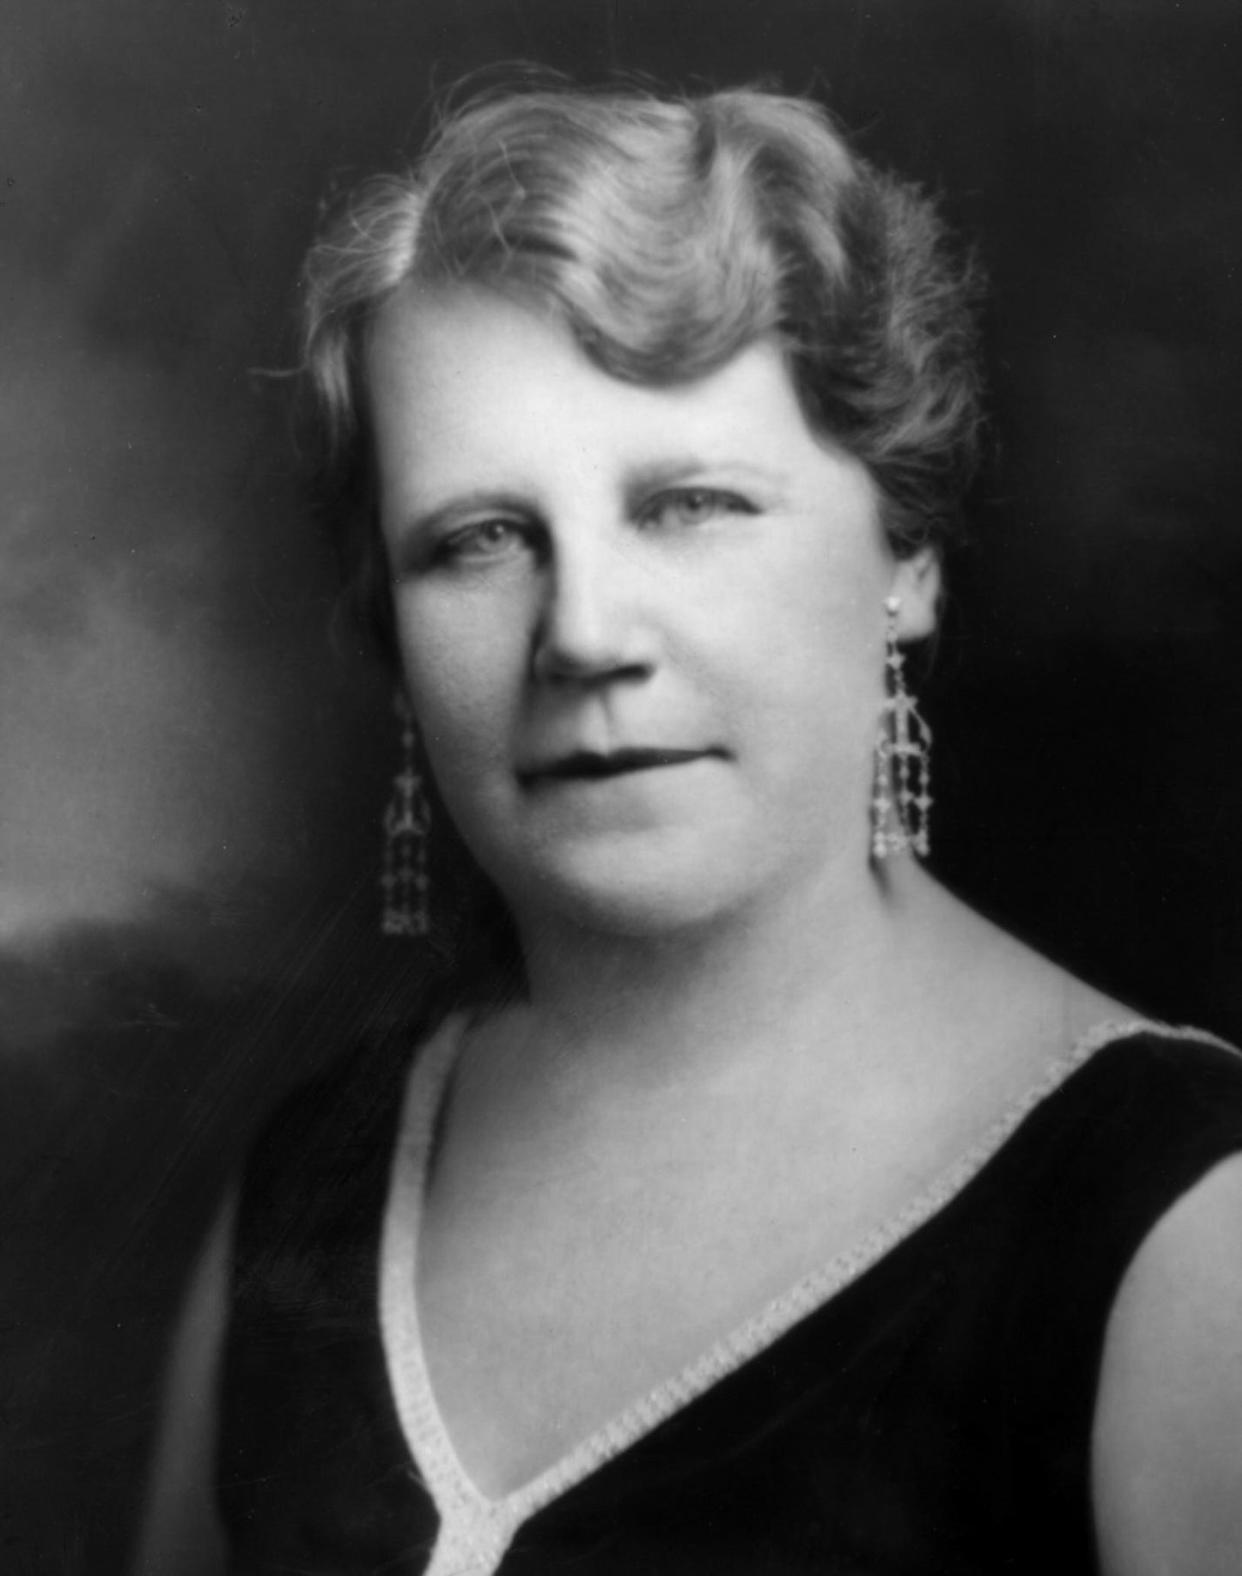 Isabelle Ahearn O'Neill was the first woman elected to the Rhode Island General Assembly.